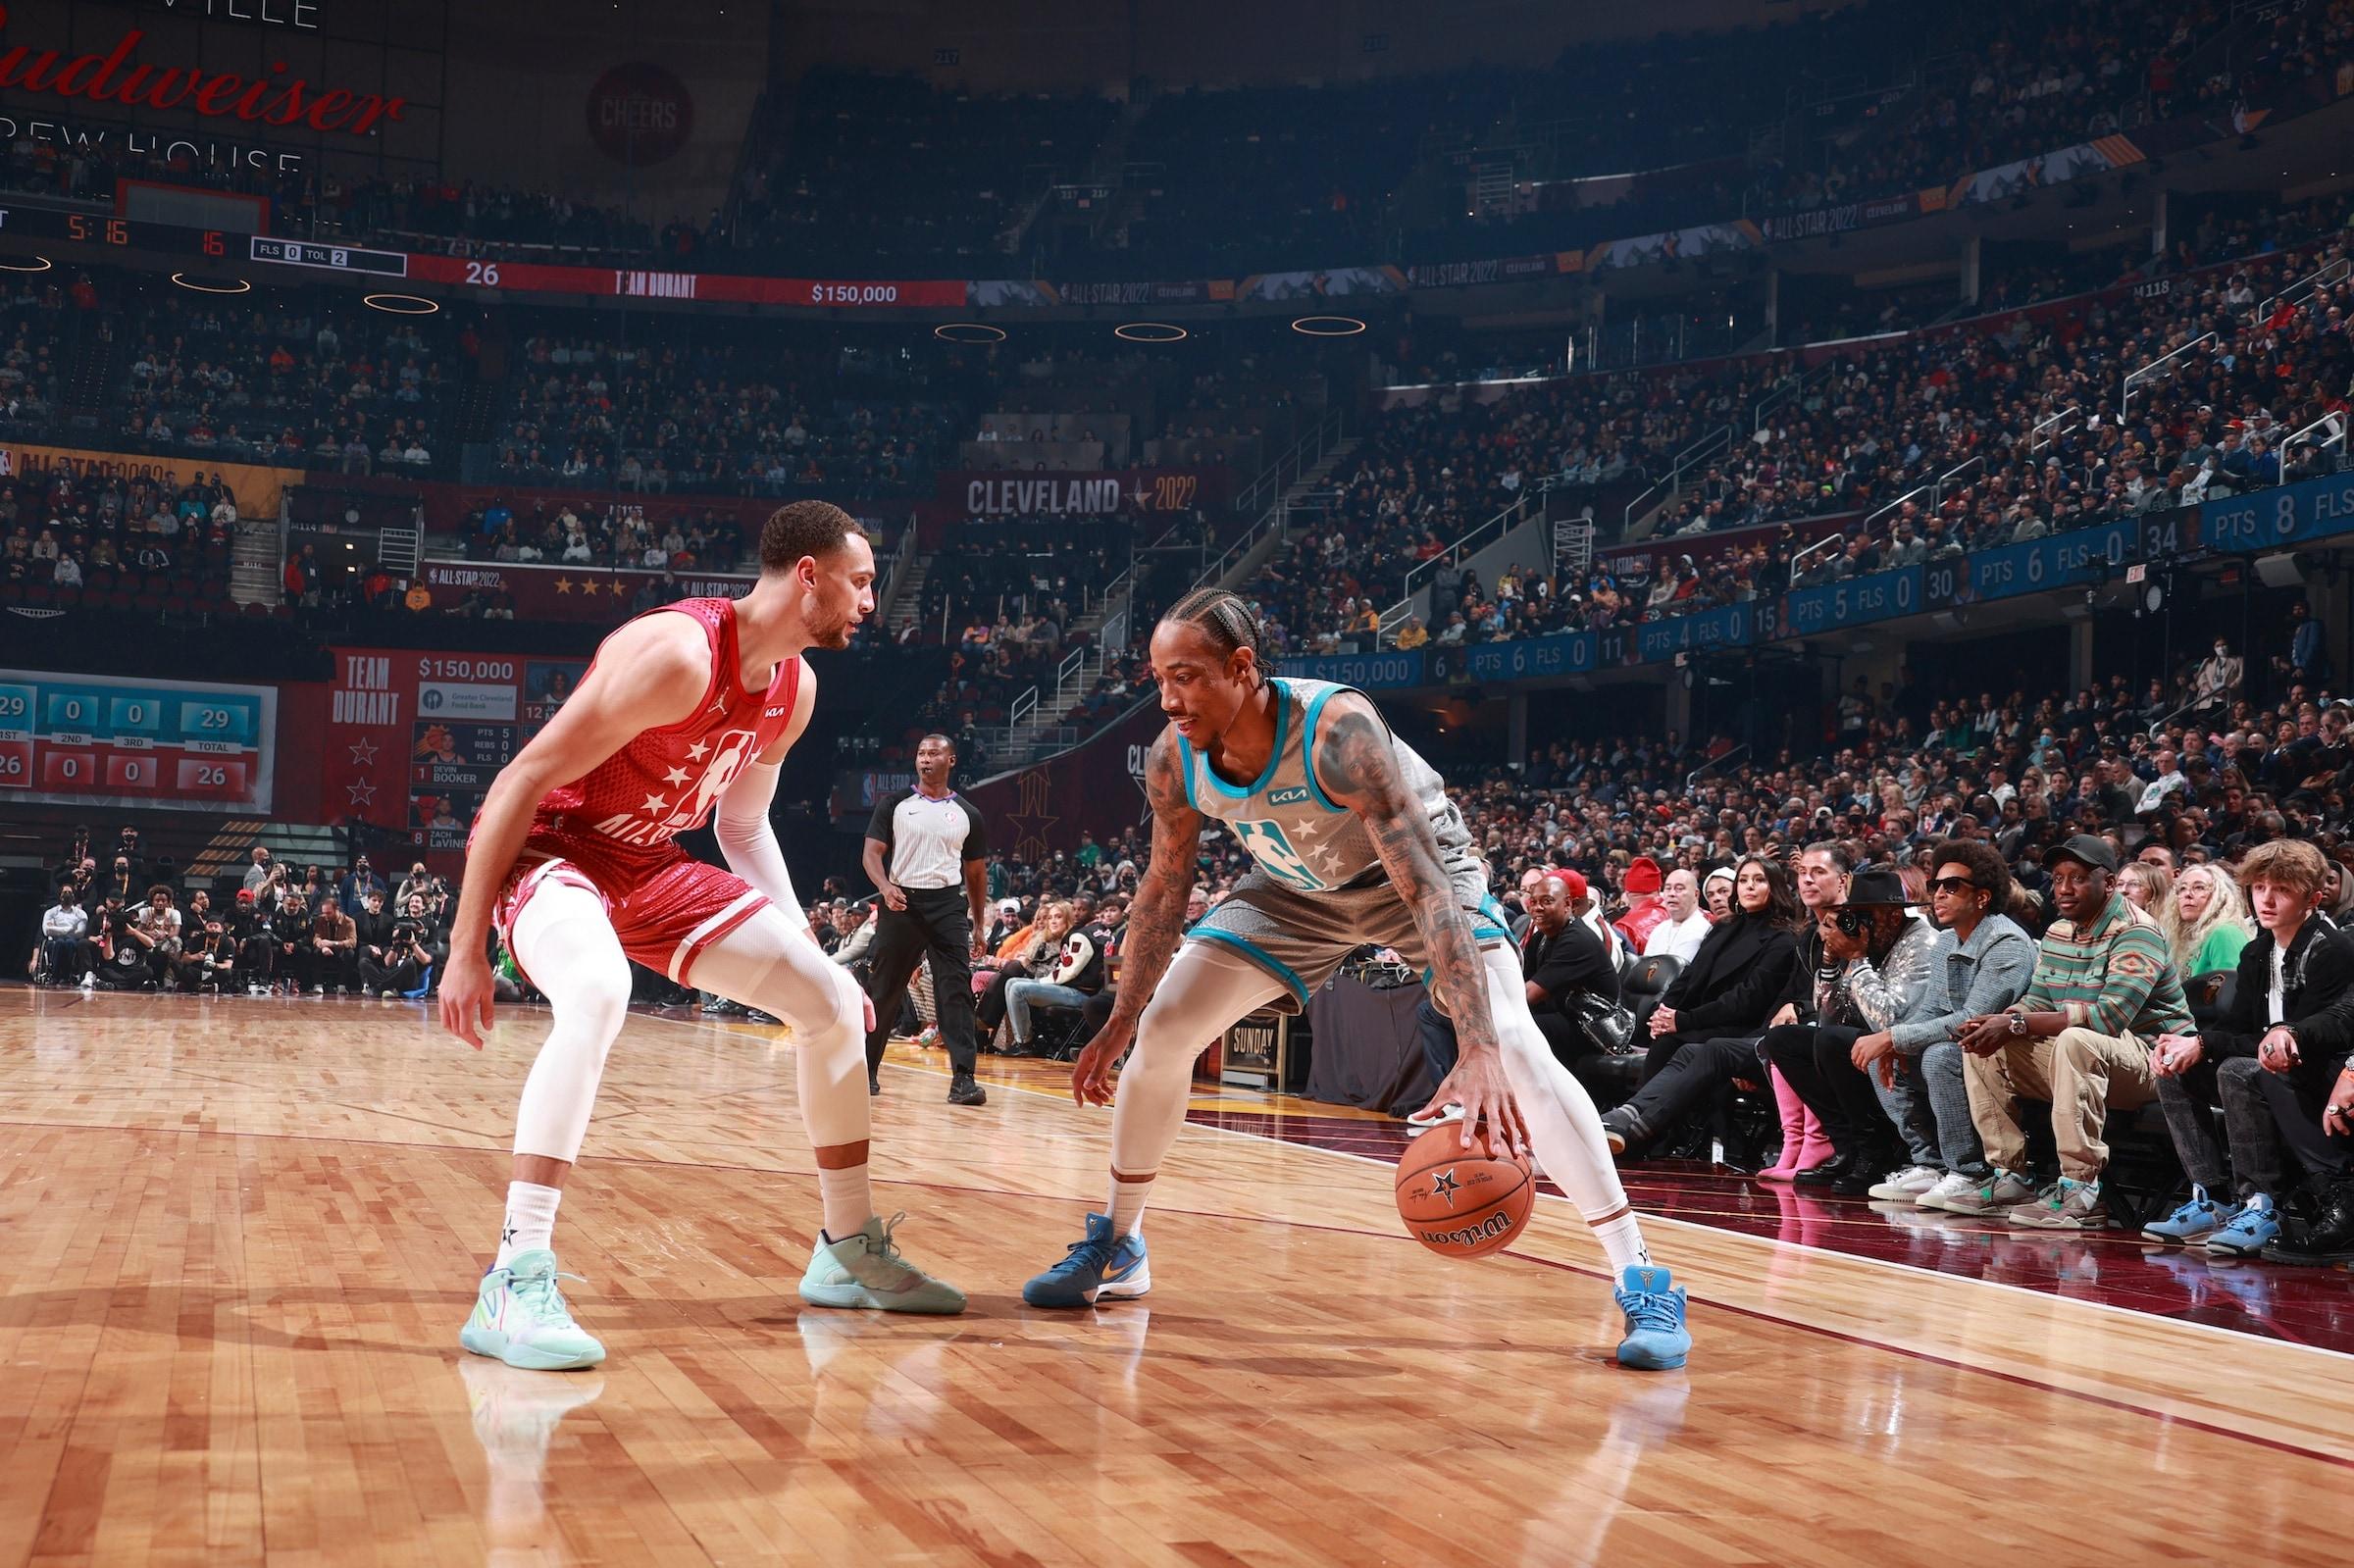 Nba All Star Game Photo Gallery